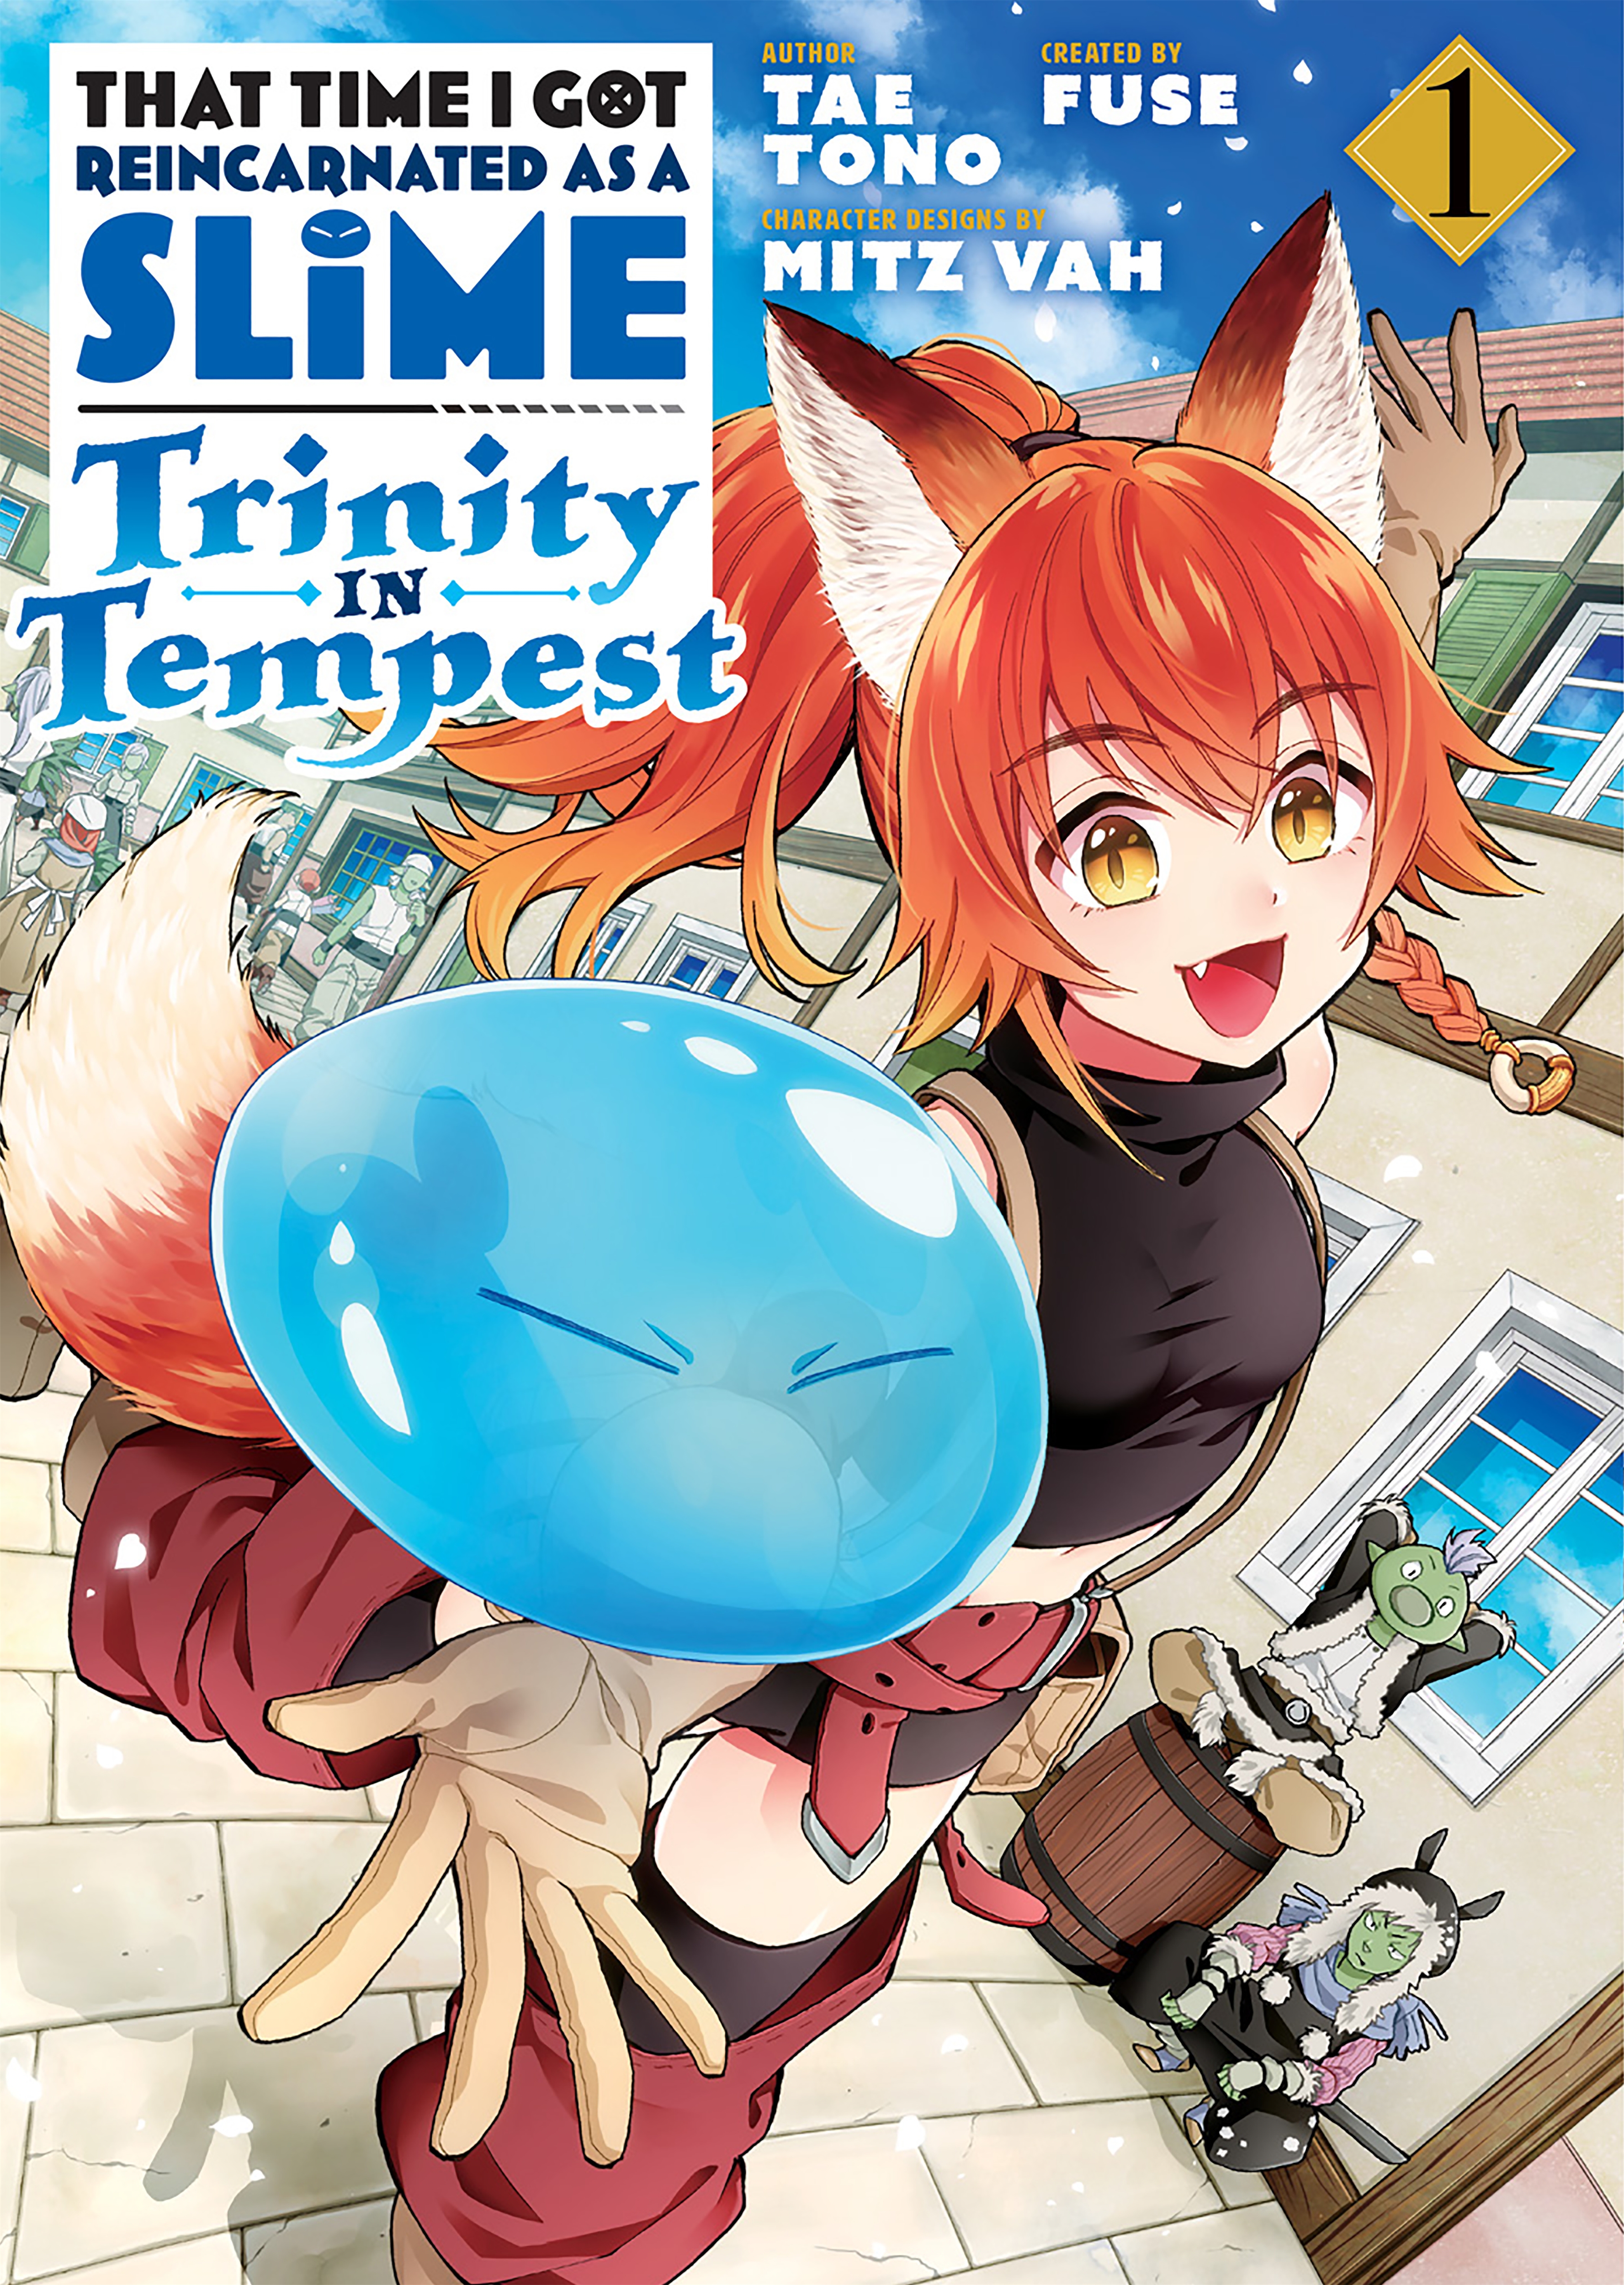 That Time I Got Reincarnated as a Slime: Trinity in Tempest (Manga) 1 by  Fuse - Penguin Books New Zealand